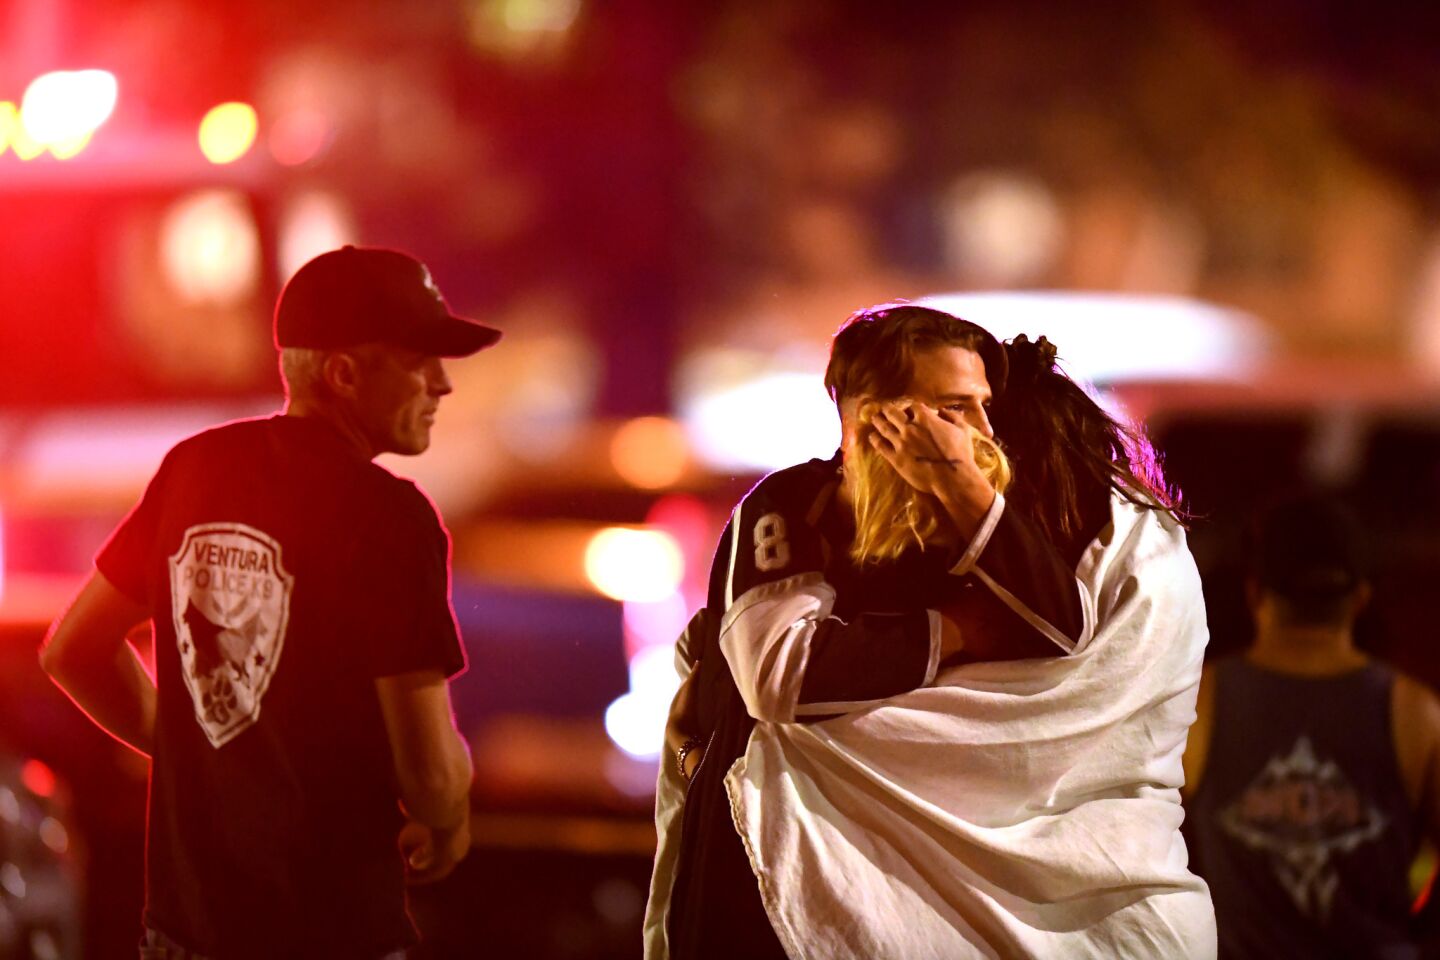 People comfort each other after a mass shooting at the Borderline Bar & Grill.